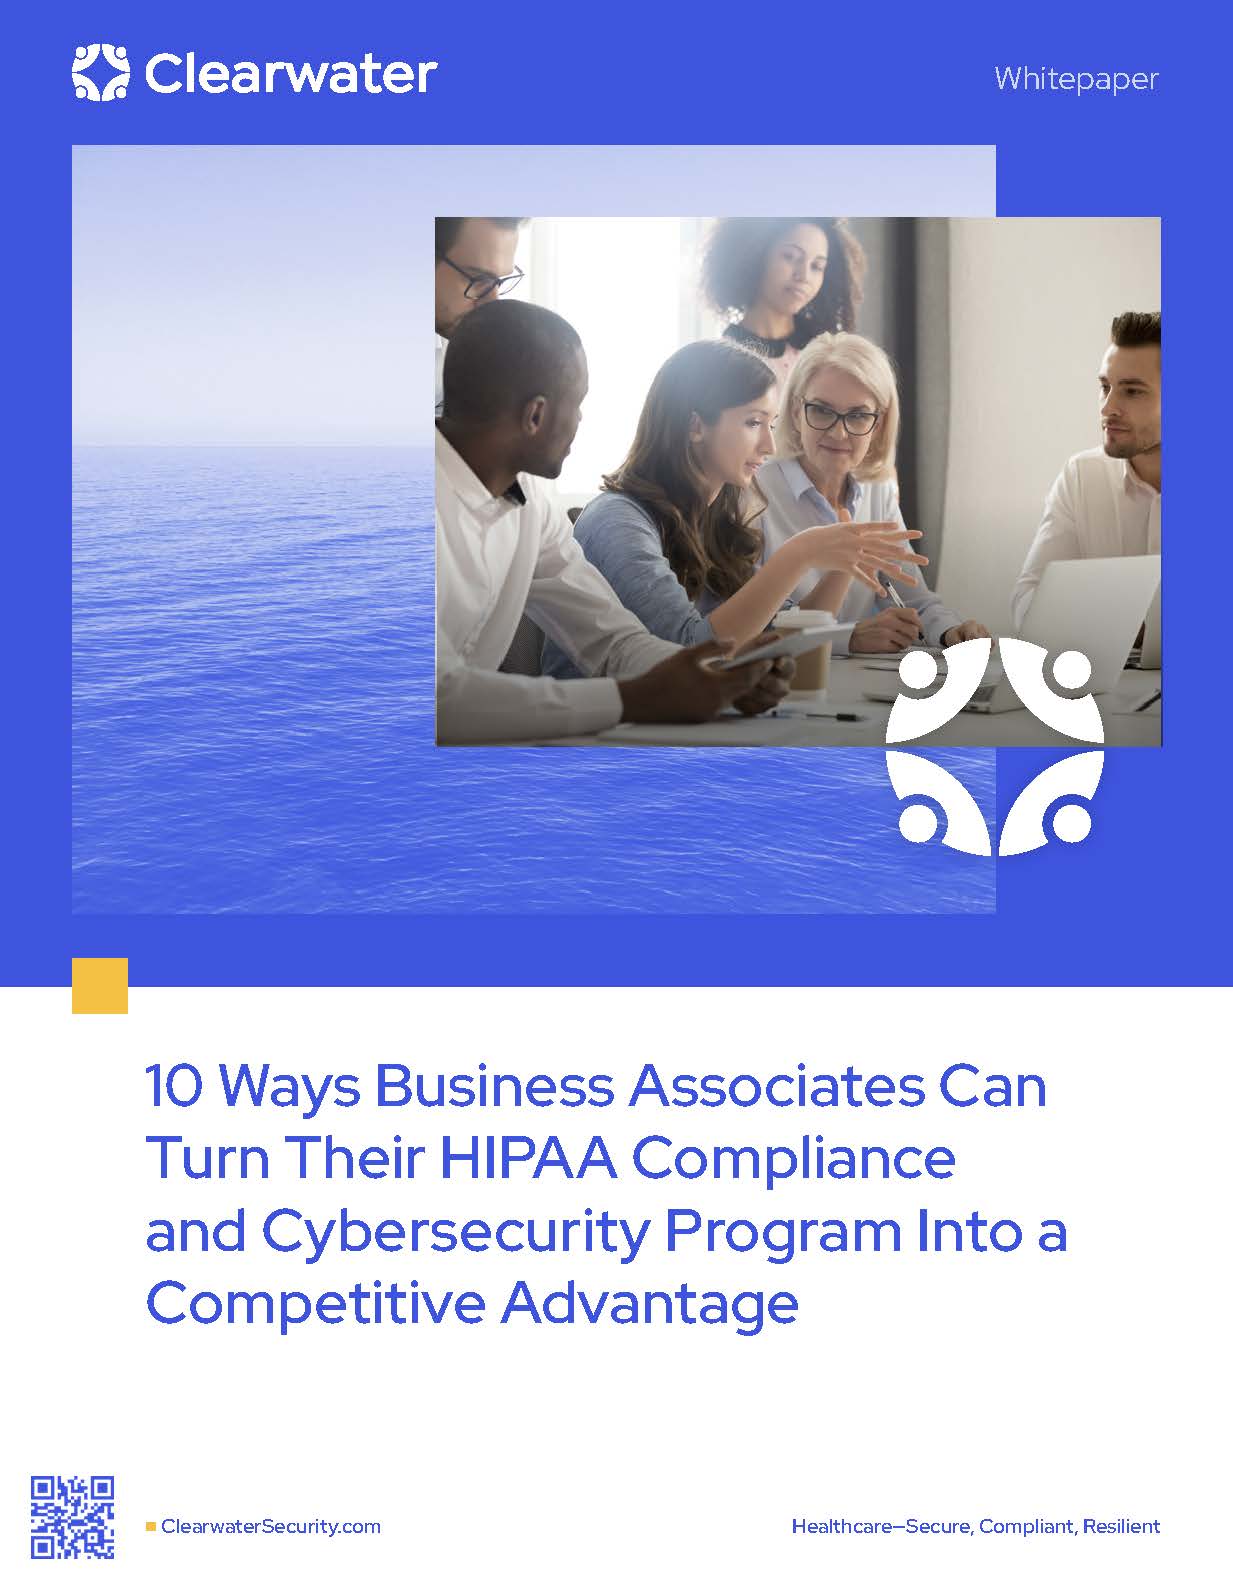 10 Ways Business Associates Can Turn Their HIPAA Compliance and Cybersecurity Program Into a Competitive Advantage by Clearwater